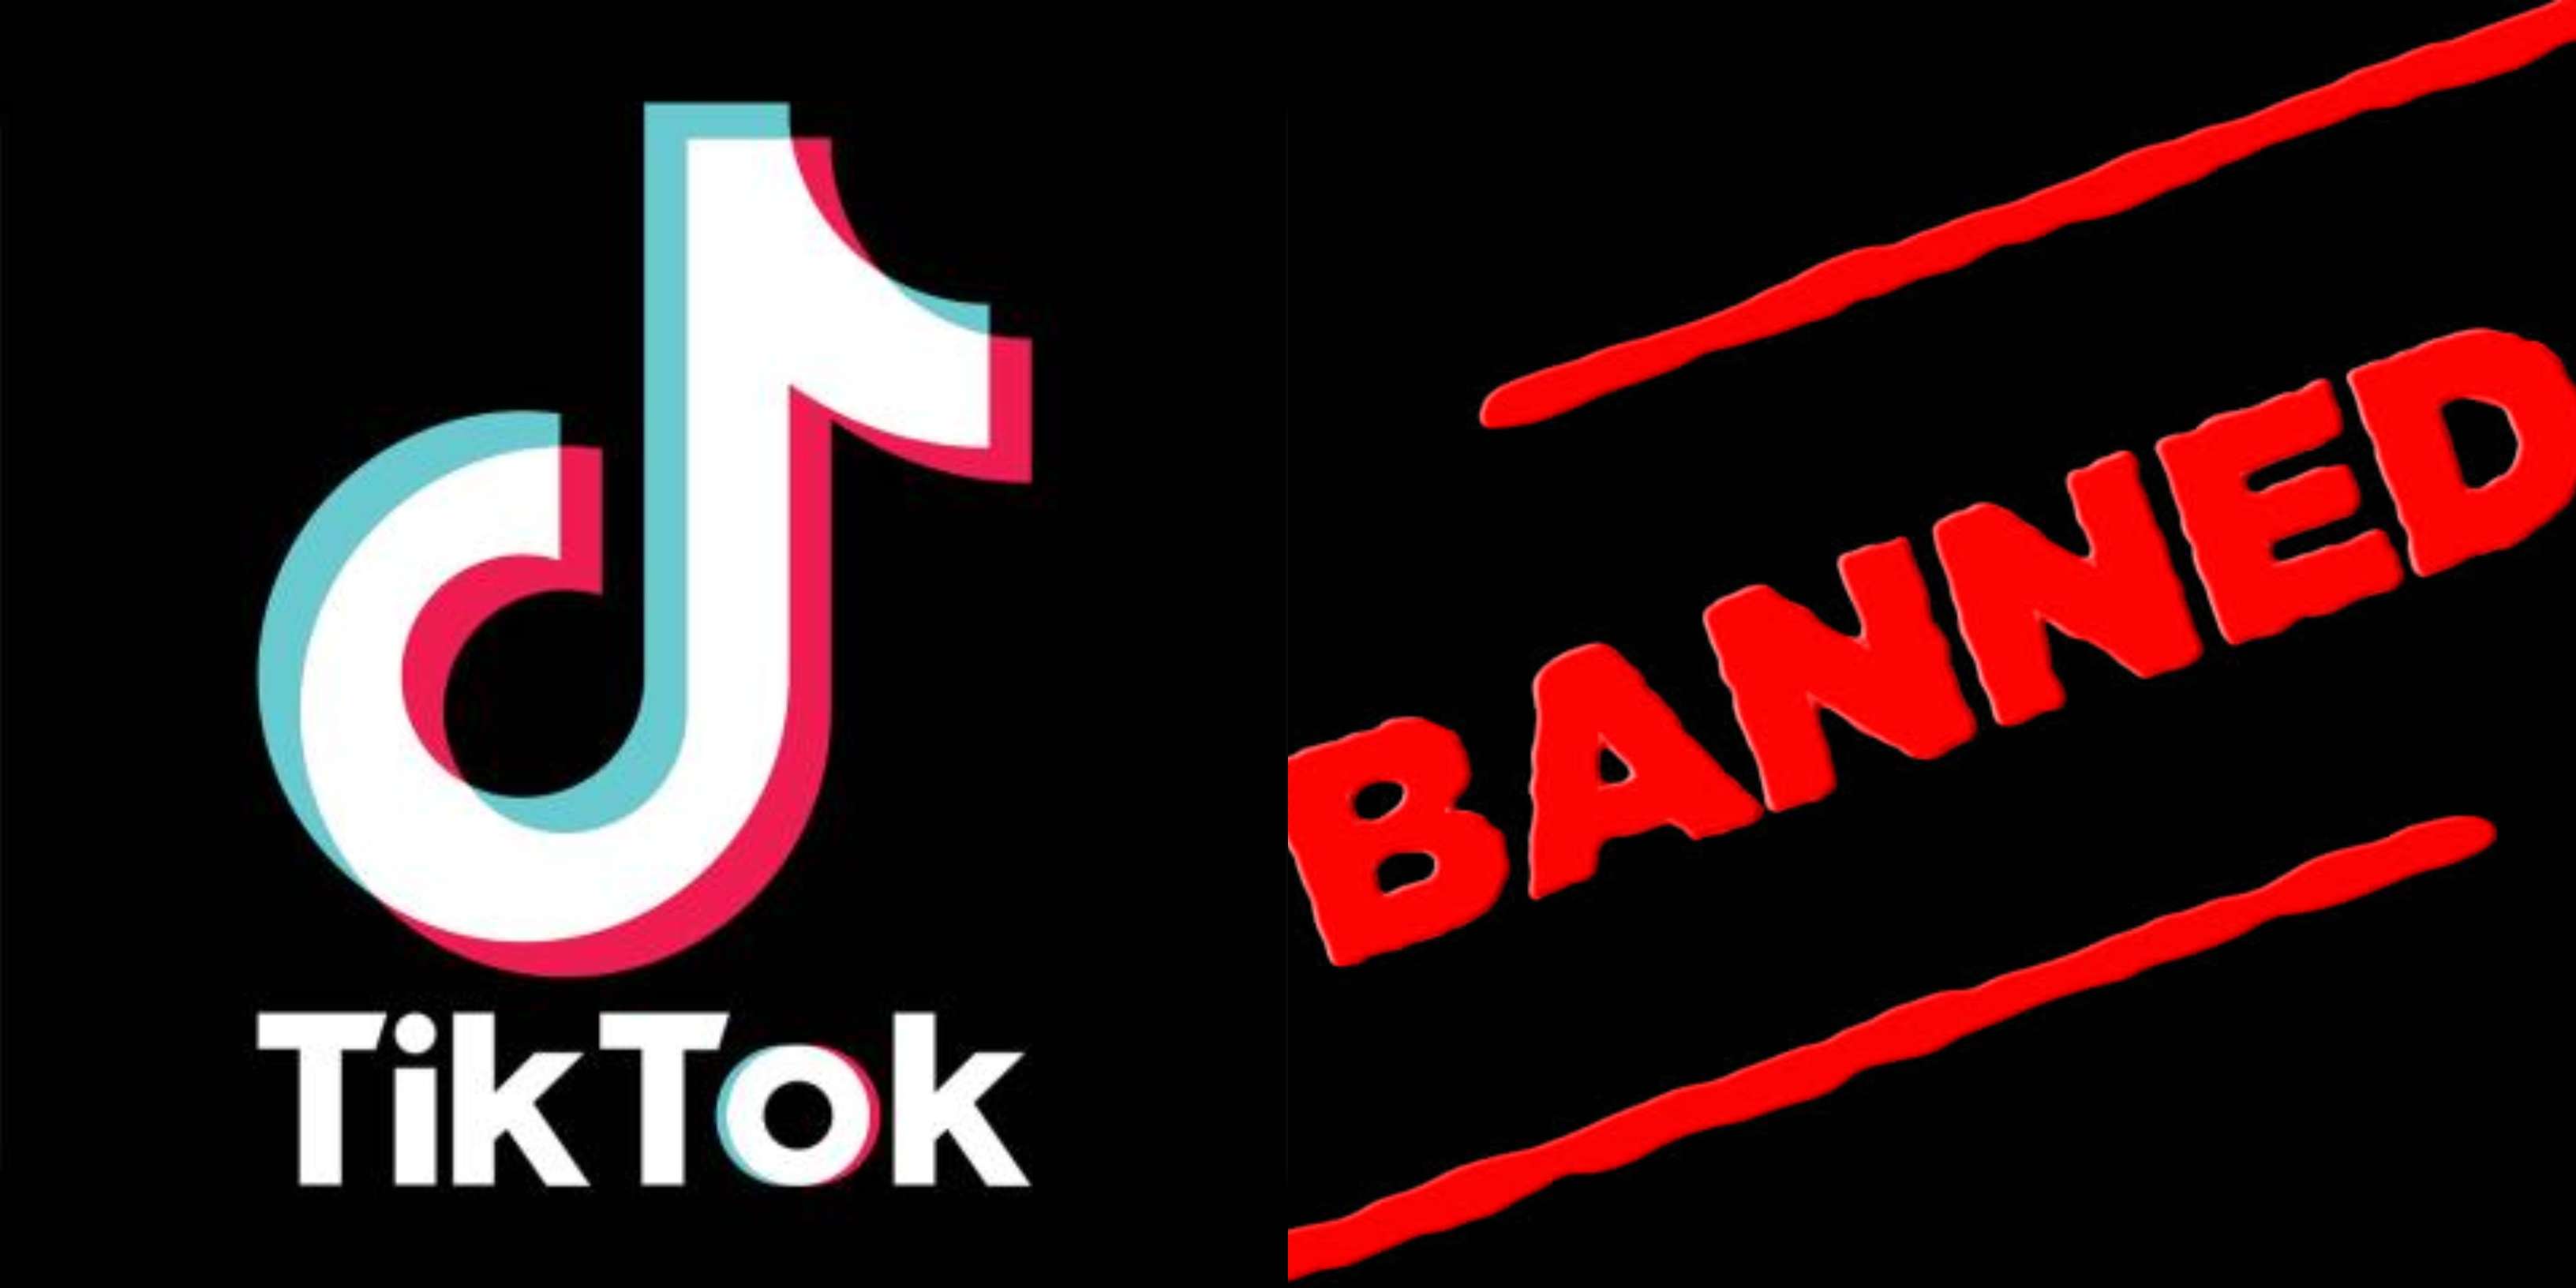 south dakota bans tiktok from state-owned devices over security concerns - breezyscroll